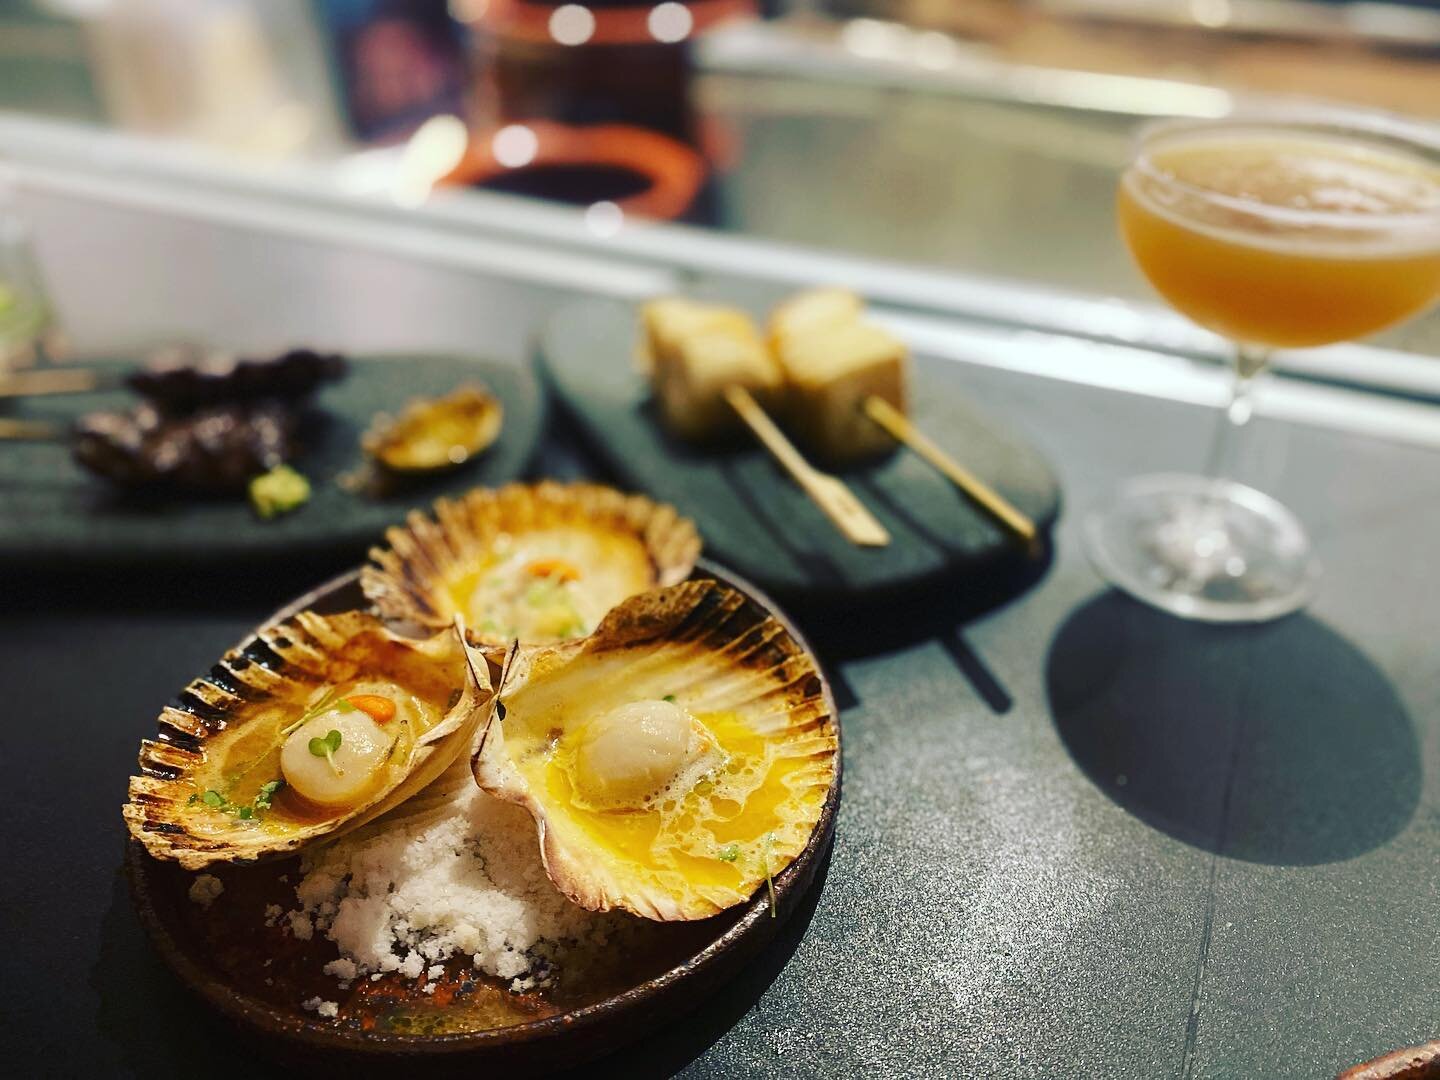 What an absolute treat! Last night we had the privilege of being involved in the launch of an exciting new restaurant @ape_yakitoribar at honeysuckle Newcastle. Just loved the set up sitting by the bar watching our gorgeous food carefully grilled ove